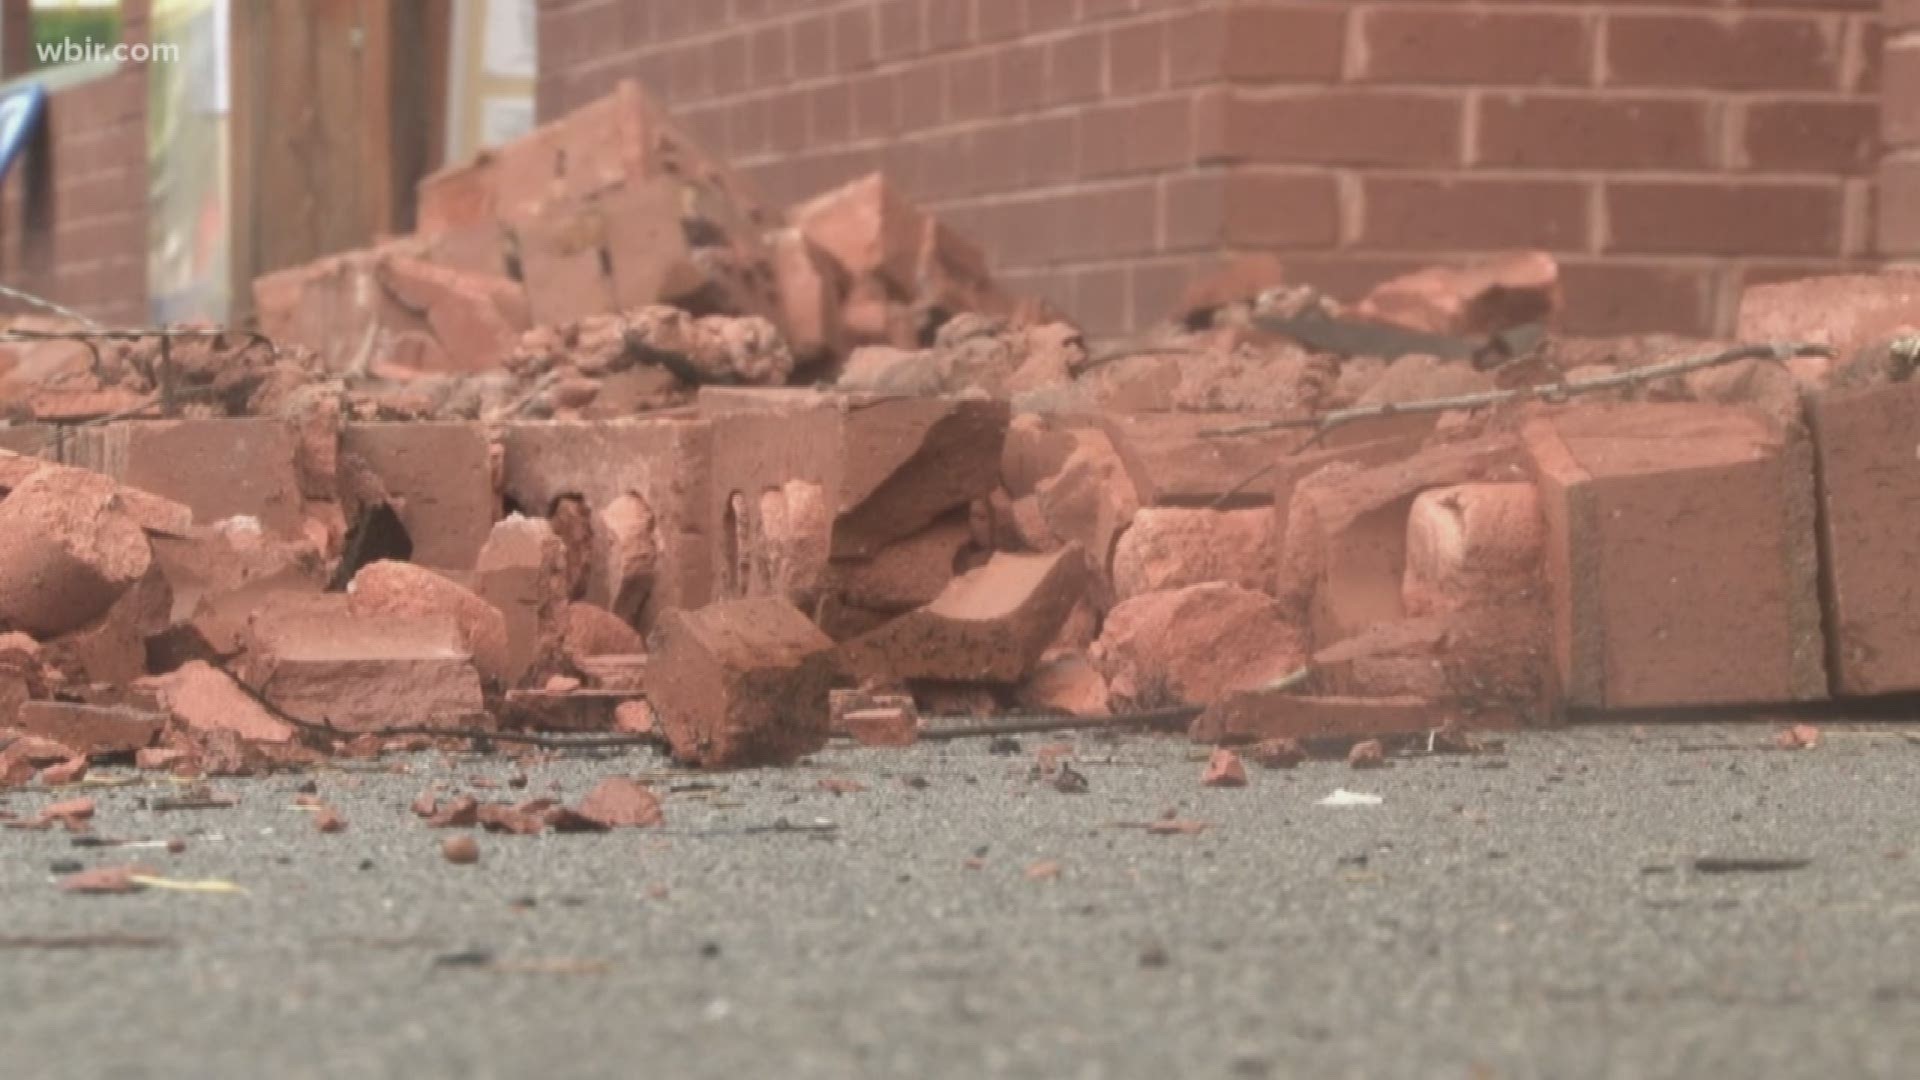 According to the Maryville Fire Department, the call came in just before noon of a brick collapse outside of Brackins Blues club on Broadway Avenue.